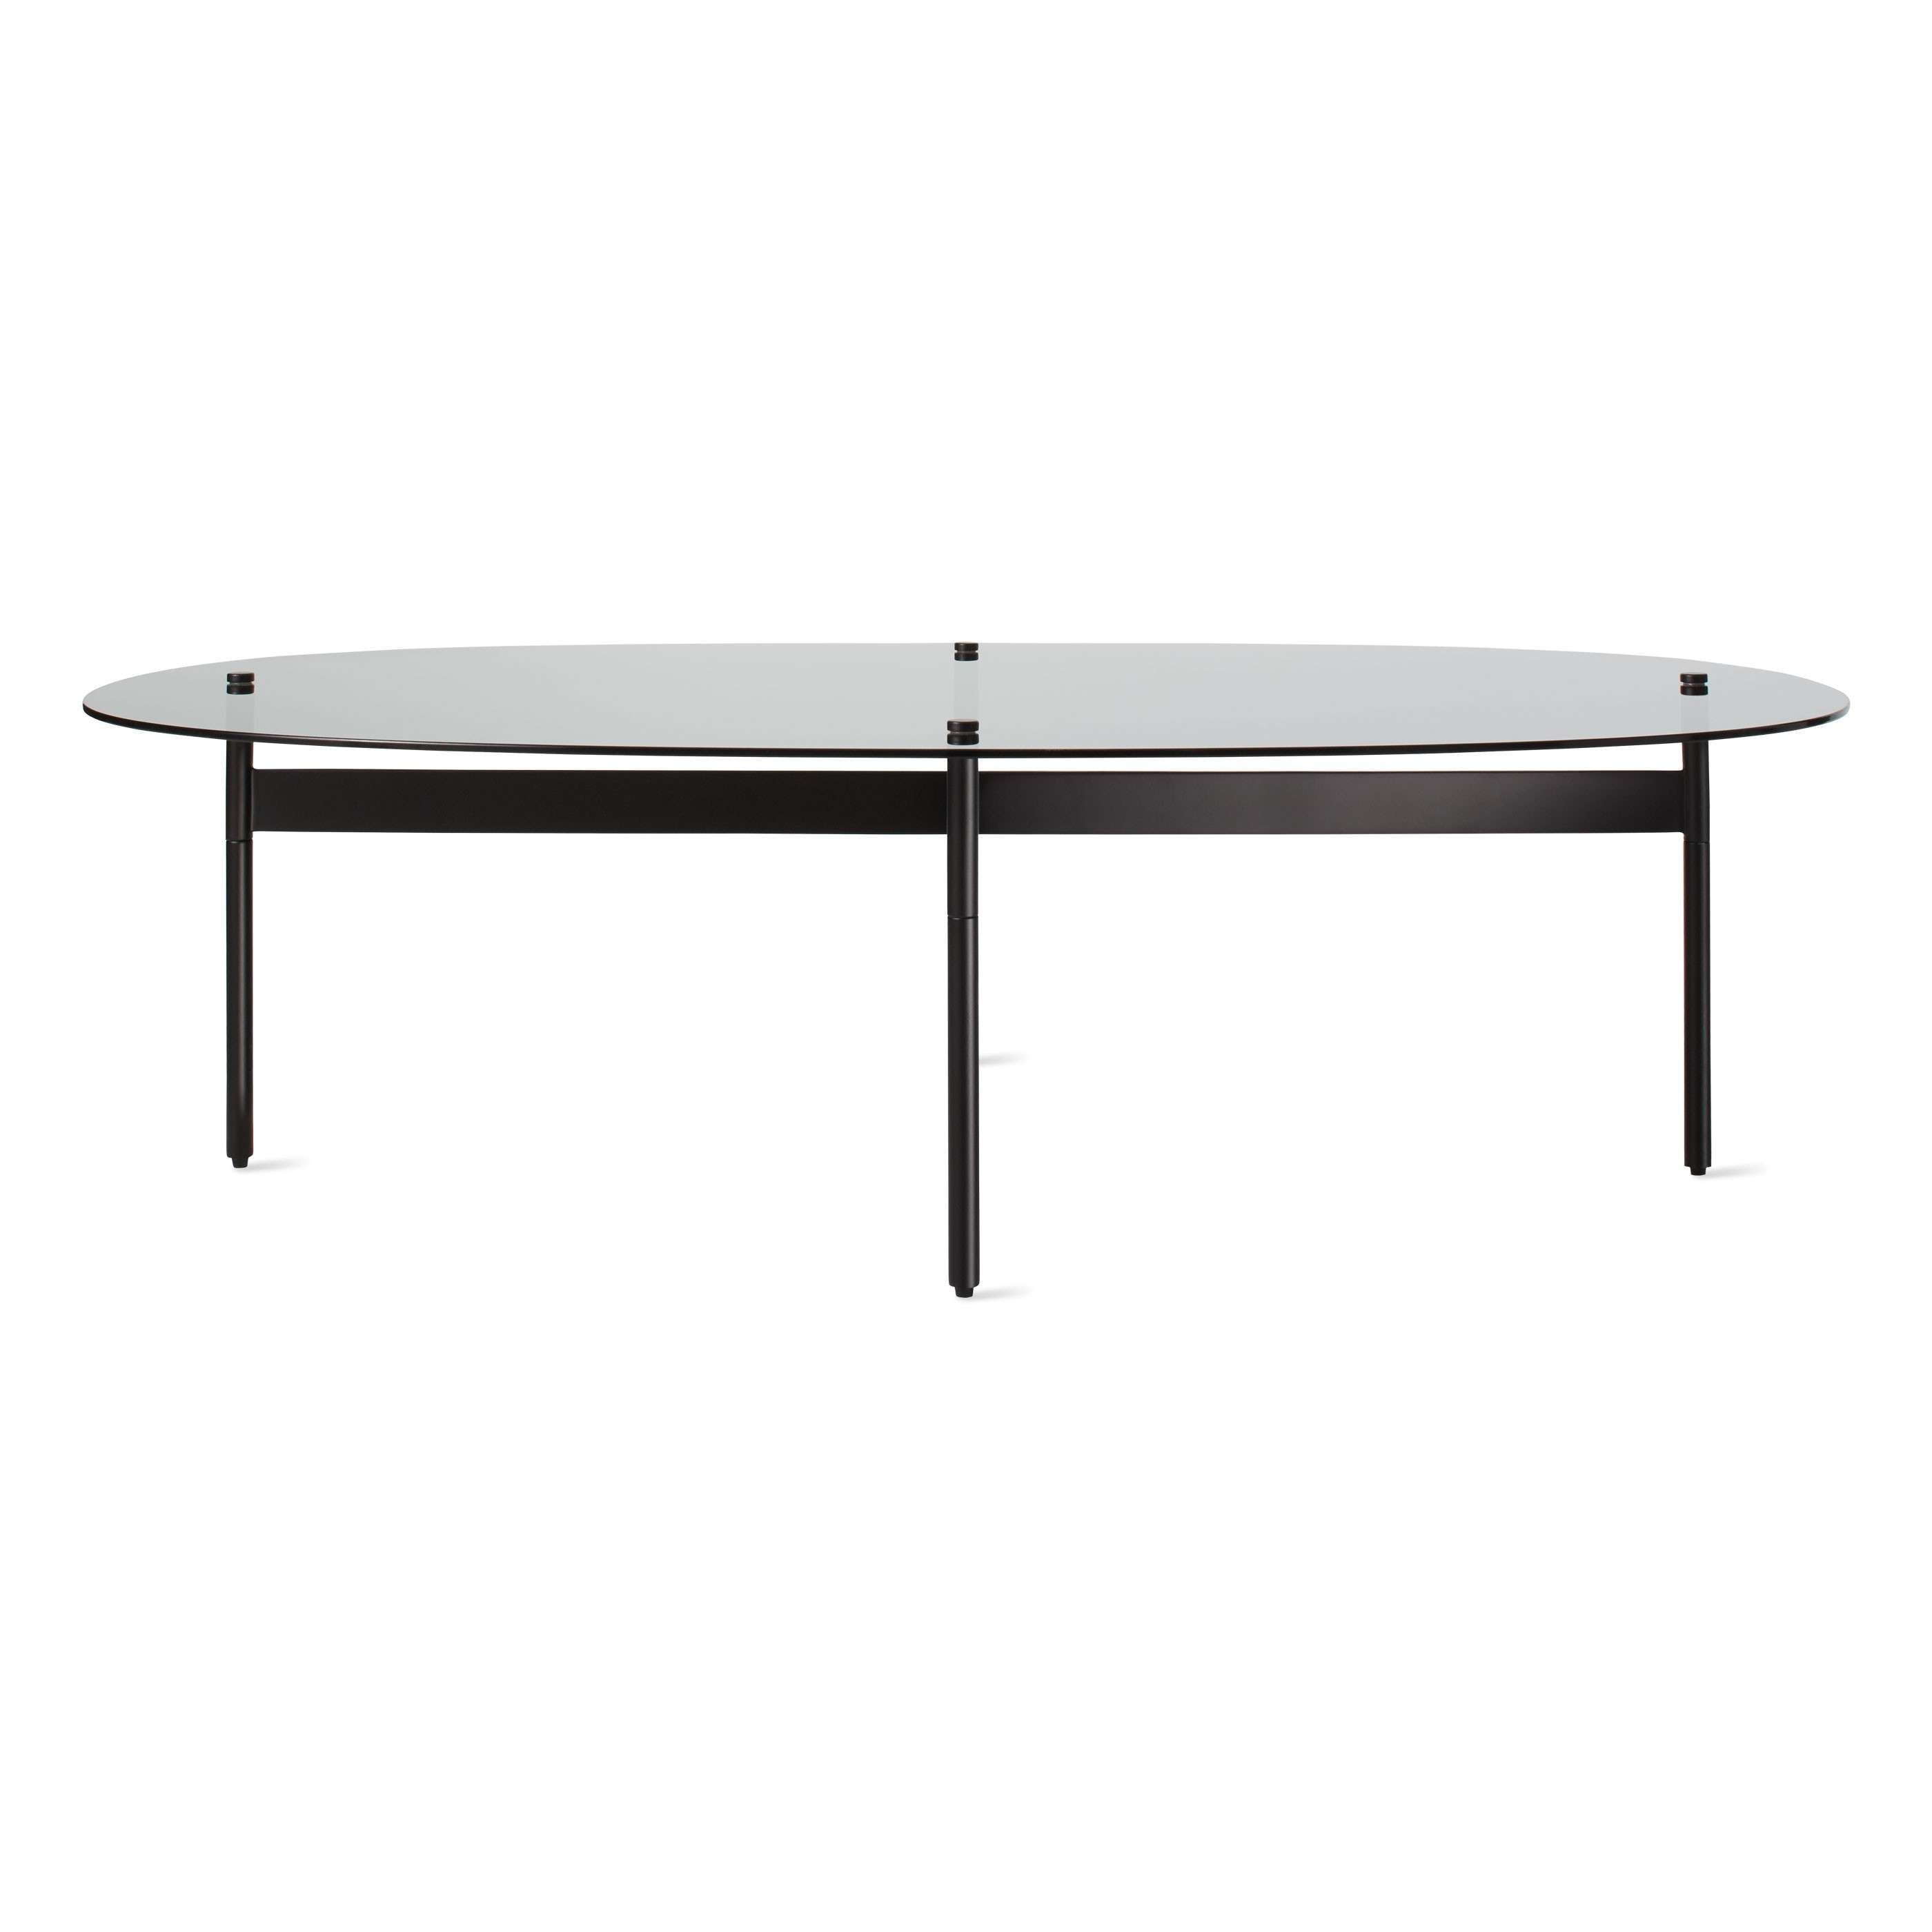 Black Oval Coffee Table Awesome And Flume Coffee Table Modern Oval For Famous Black Oval Coffee Table (View 14 of 20)